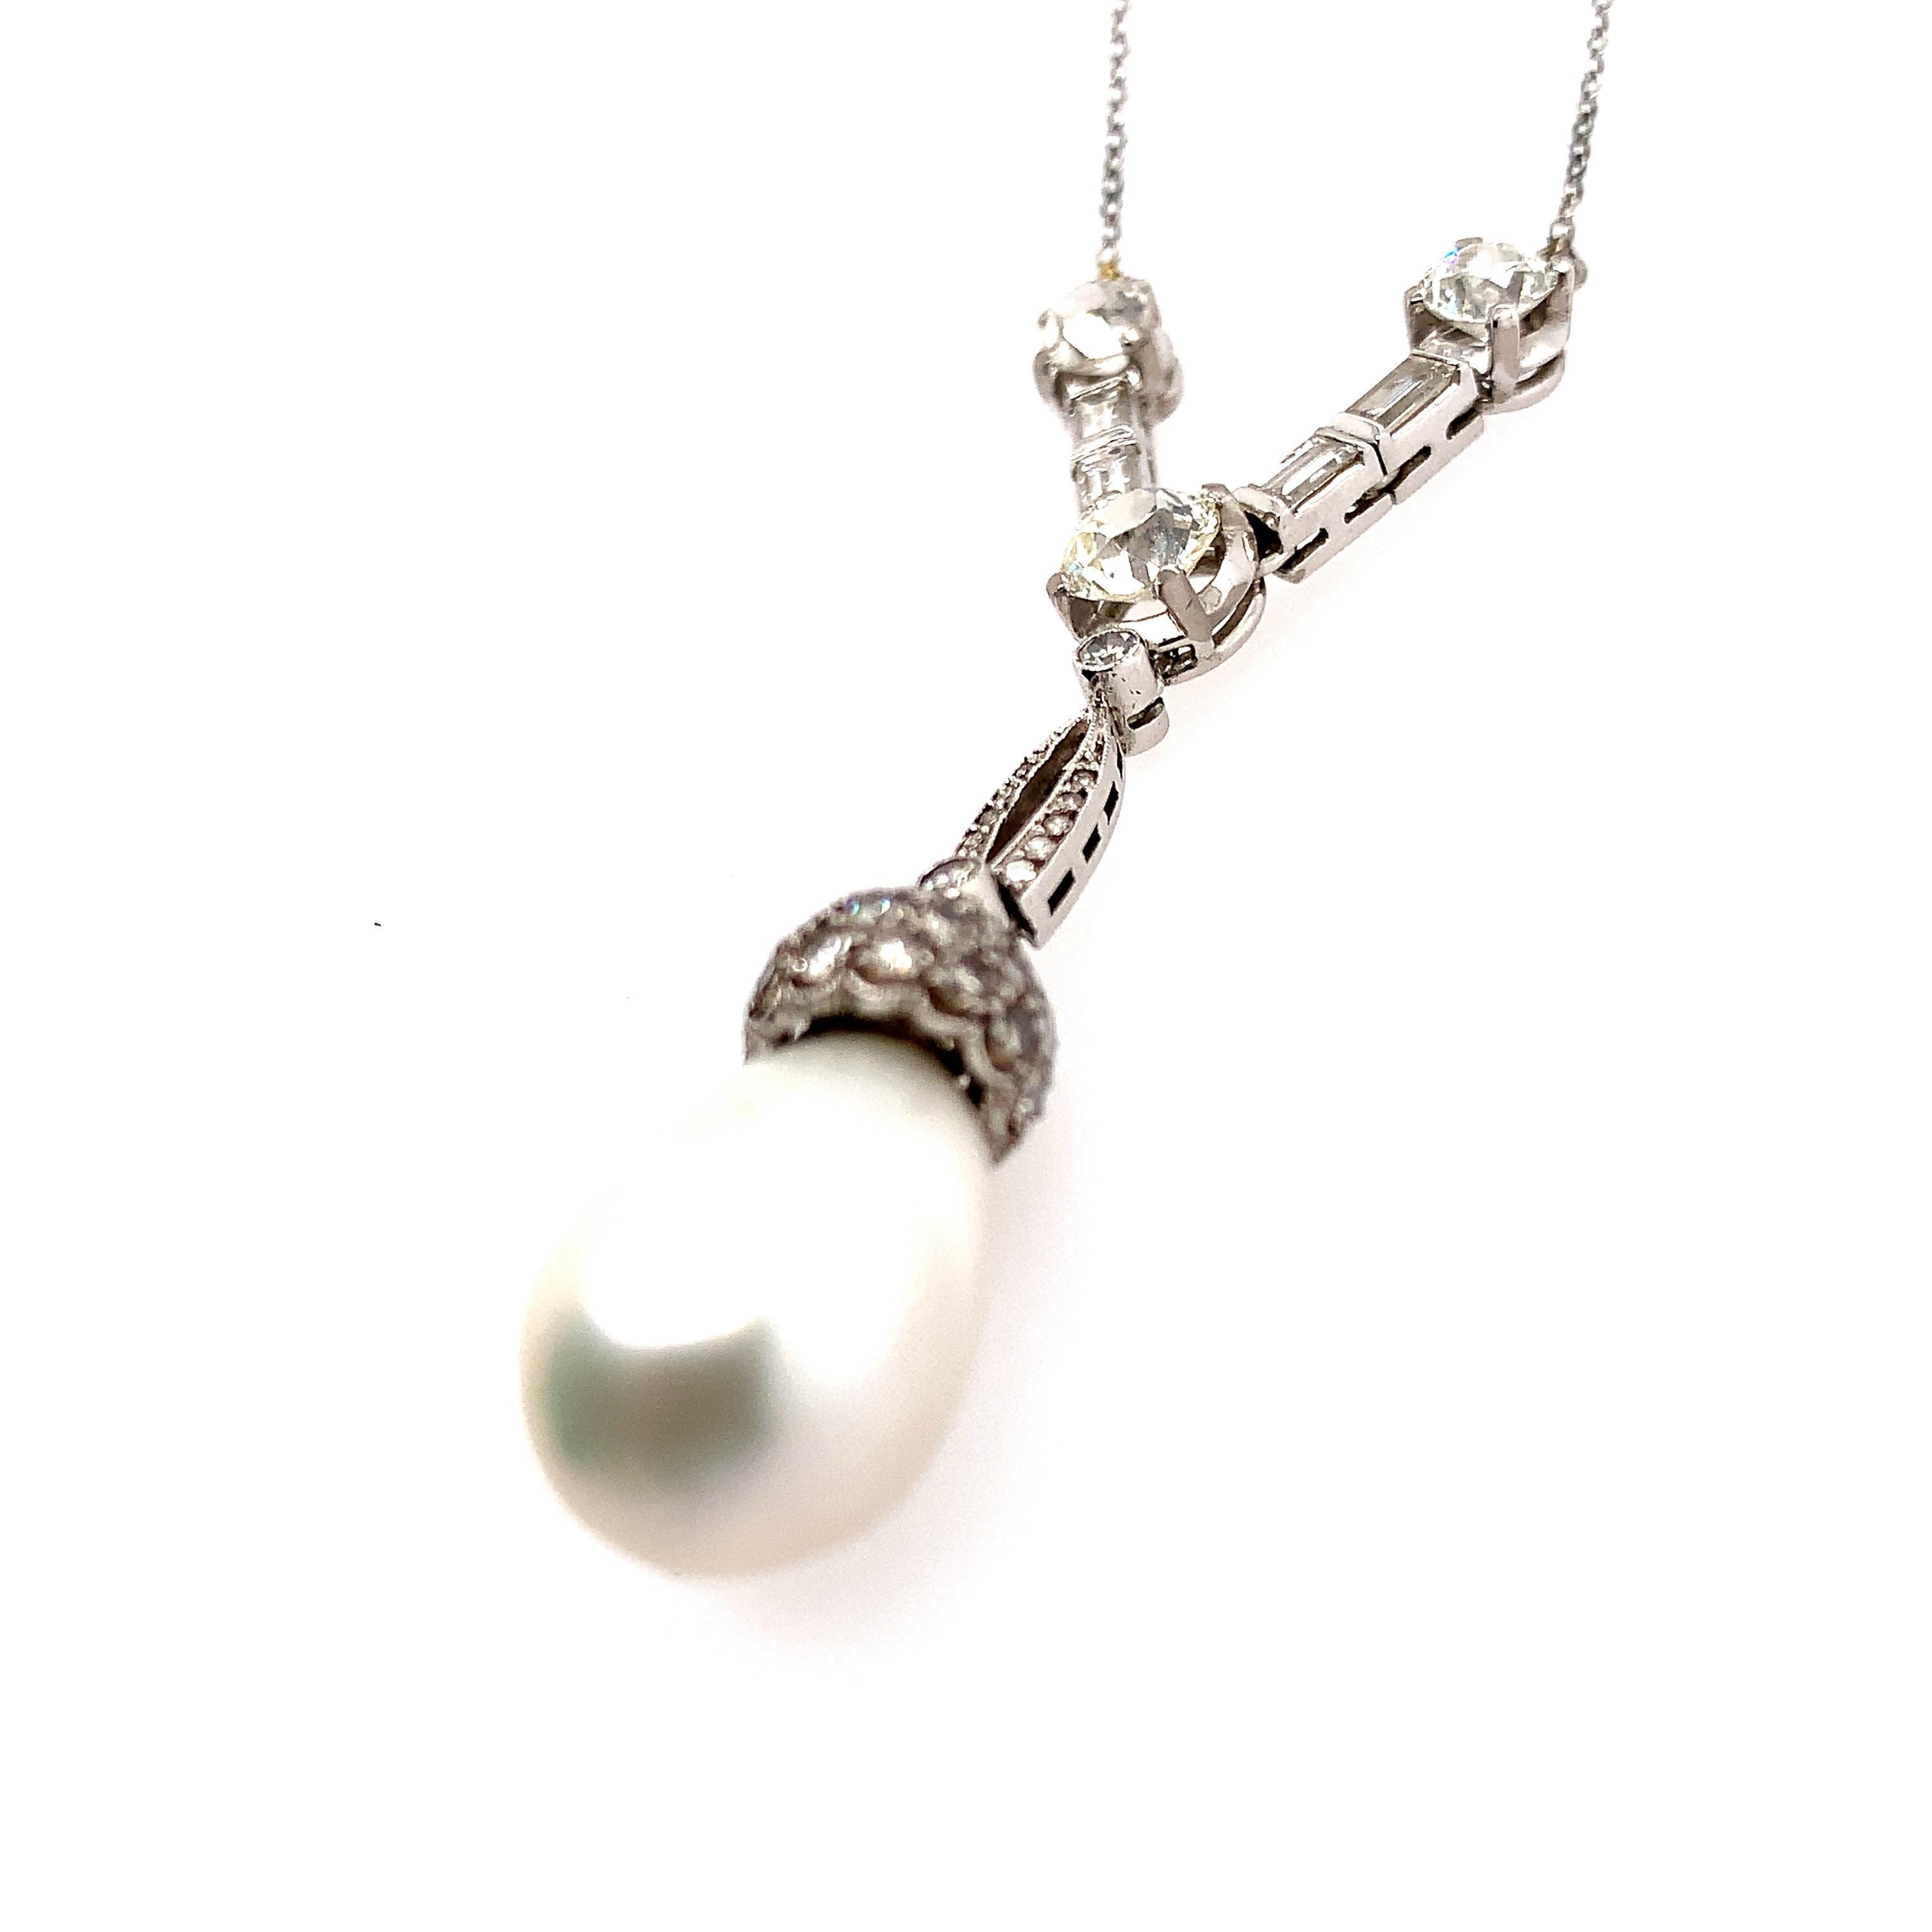 Suspending a cultured pearl drop measuring 10.6 mm by 14.0 mm, from a pavé-set diamond cap, further set with an old European-cut diamond weighing approximately 0.65 carat, a pair of smaller old European-cut diamonds weighing approximately 0.75